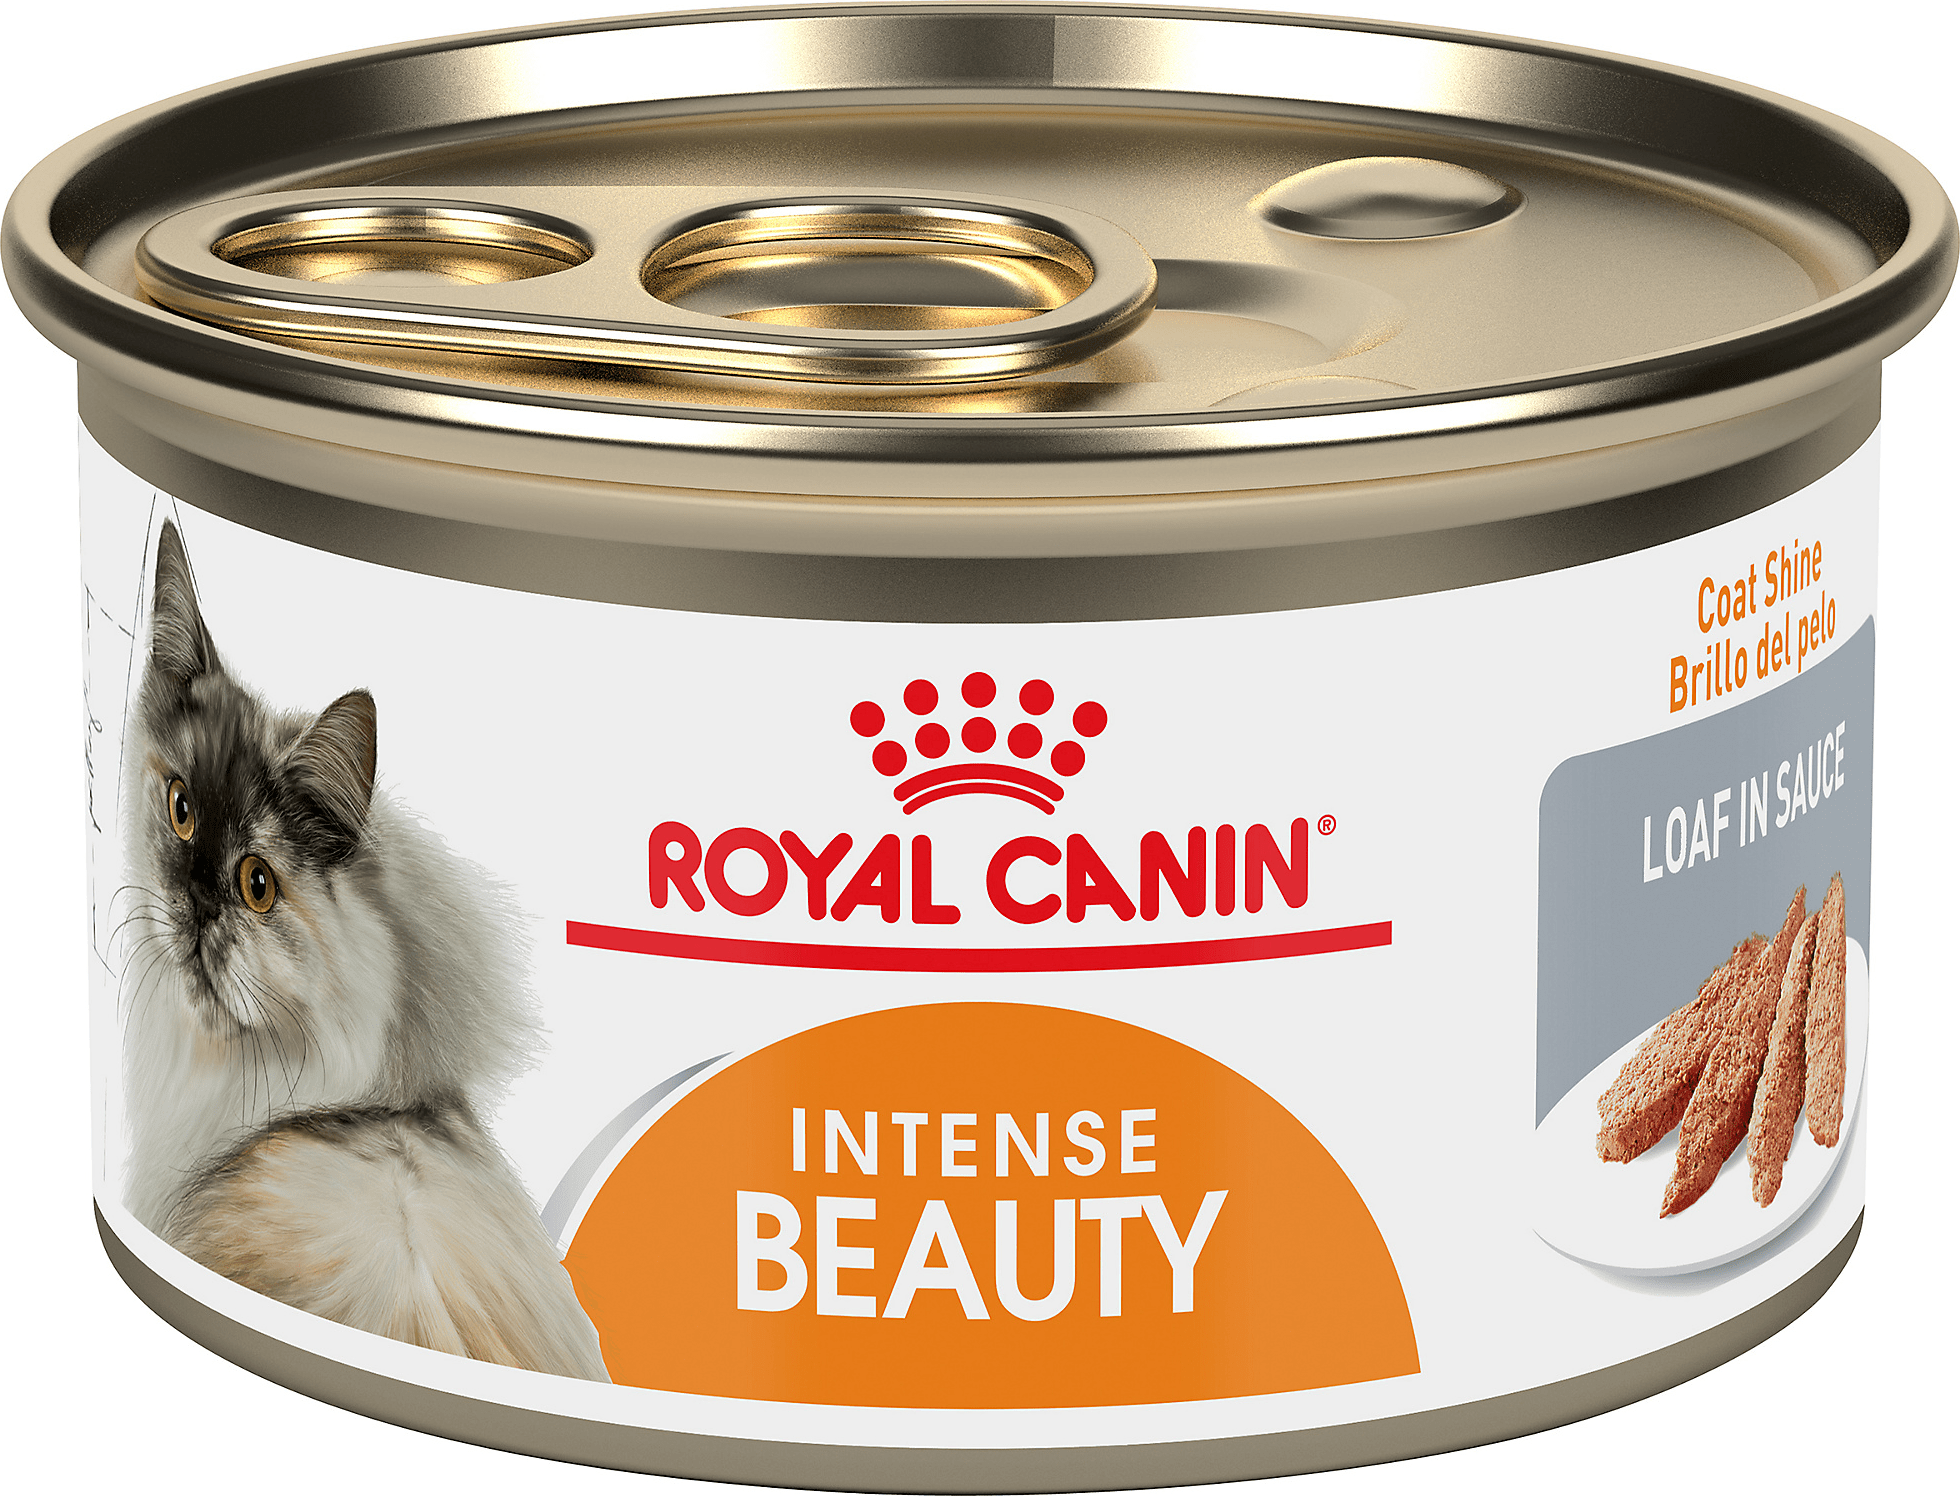 Royal Canin Intense Beauty Loaf In Sauce